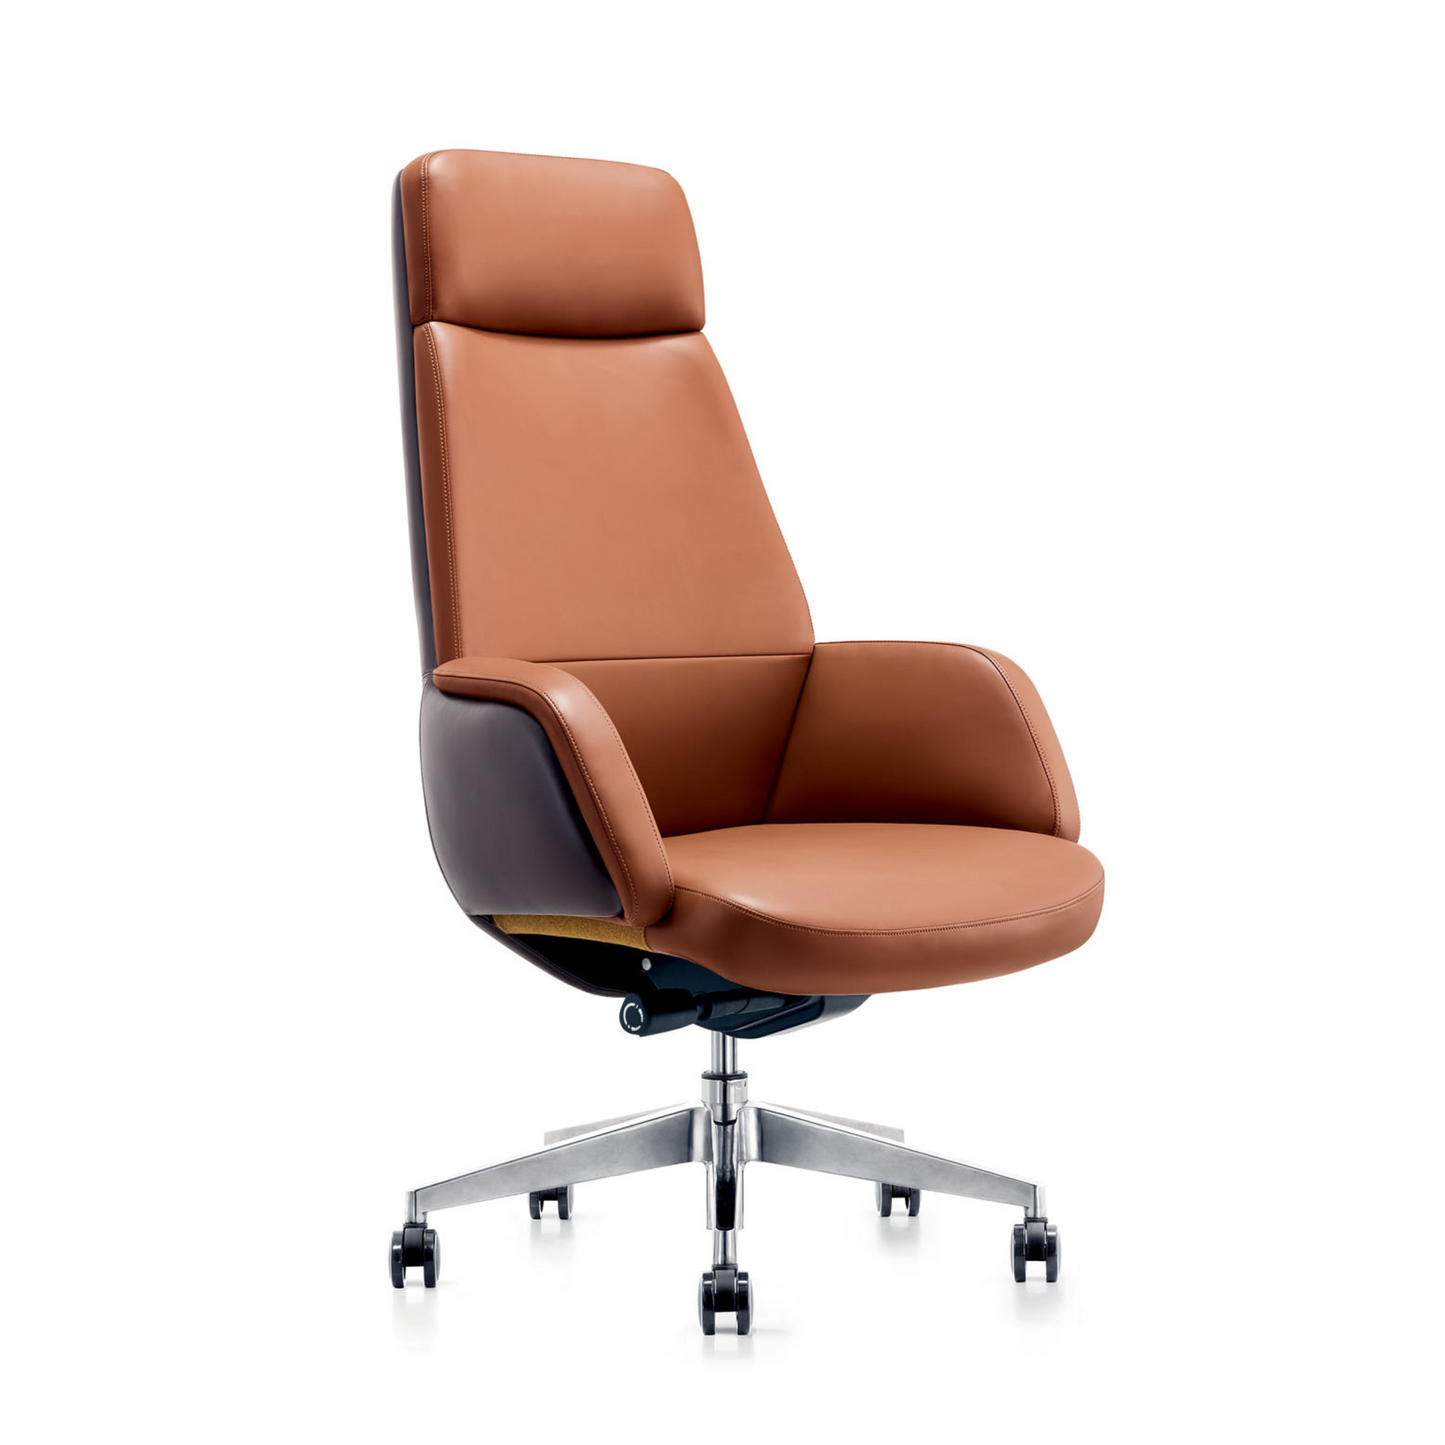 H79 PU Leather Mid-back Executive Chair